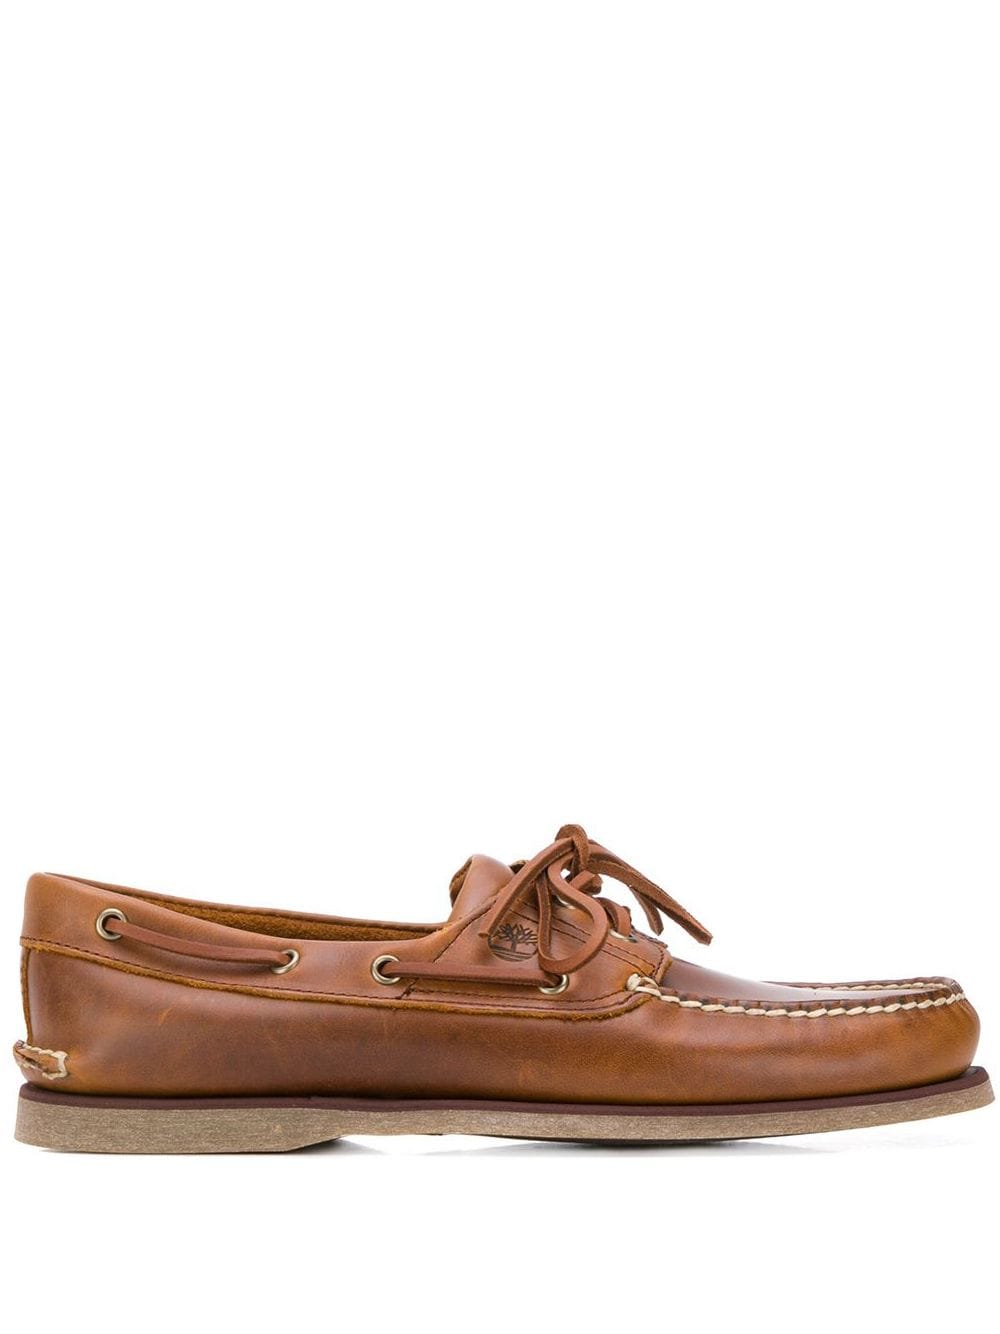 Brown leather lace-up boat shoes